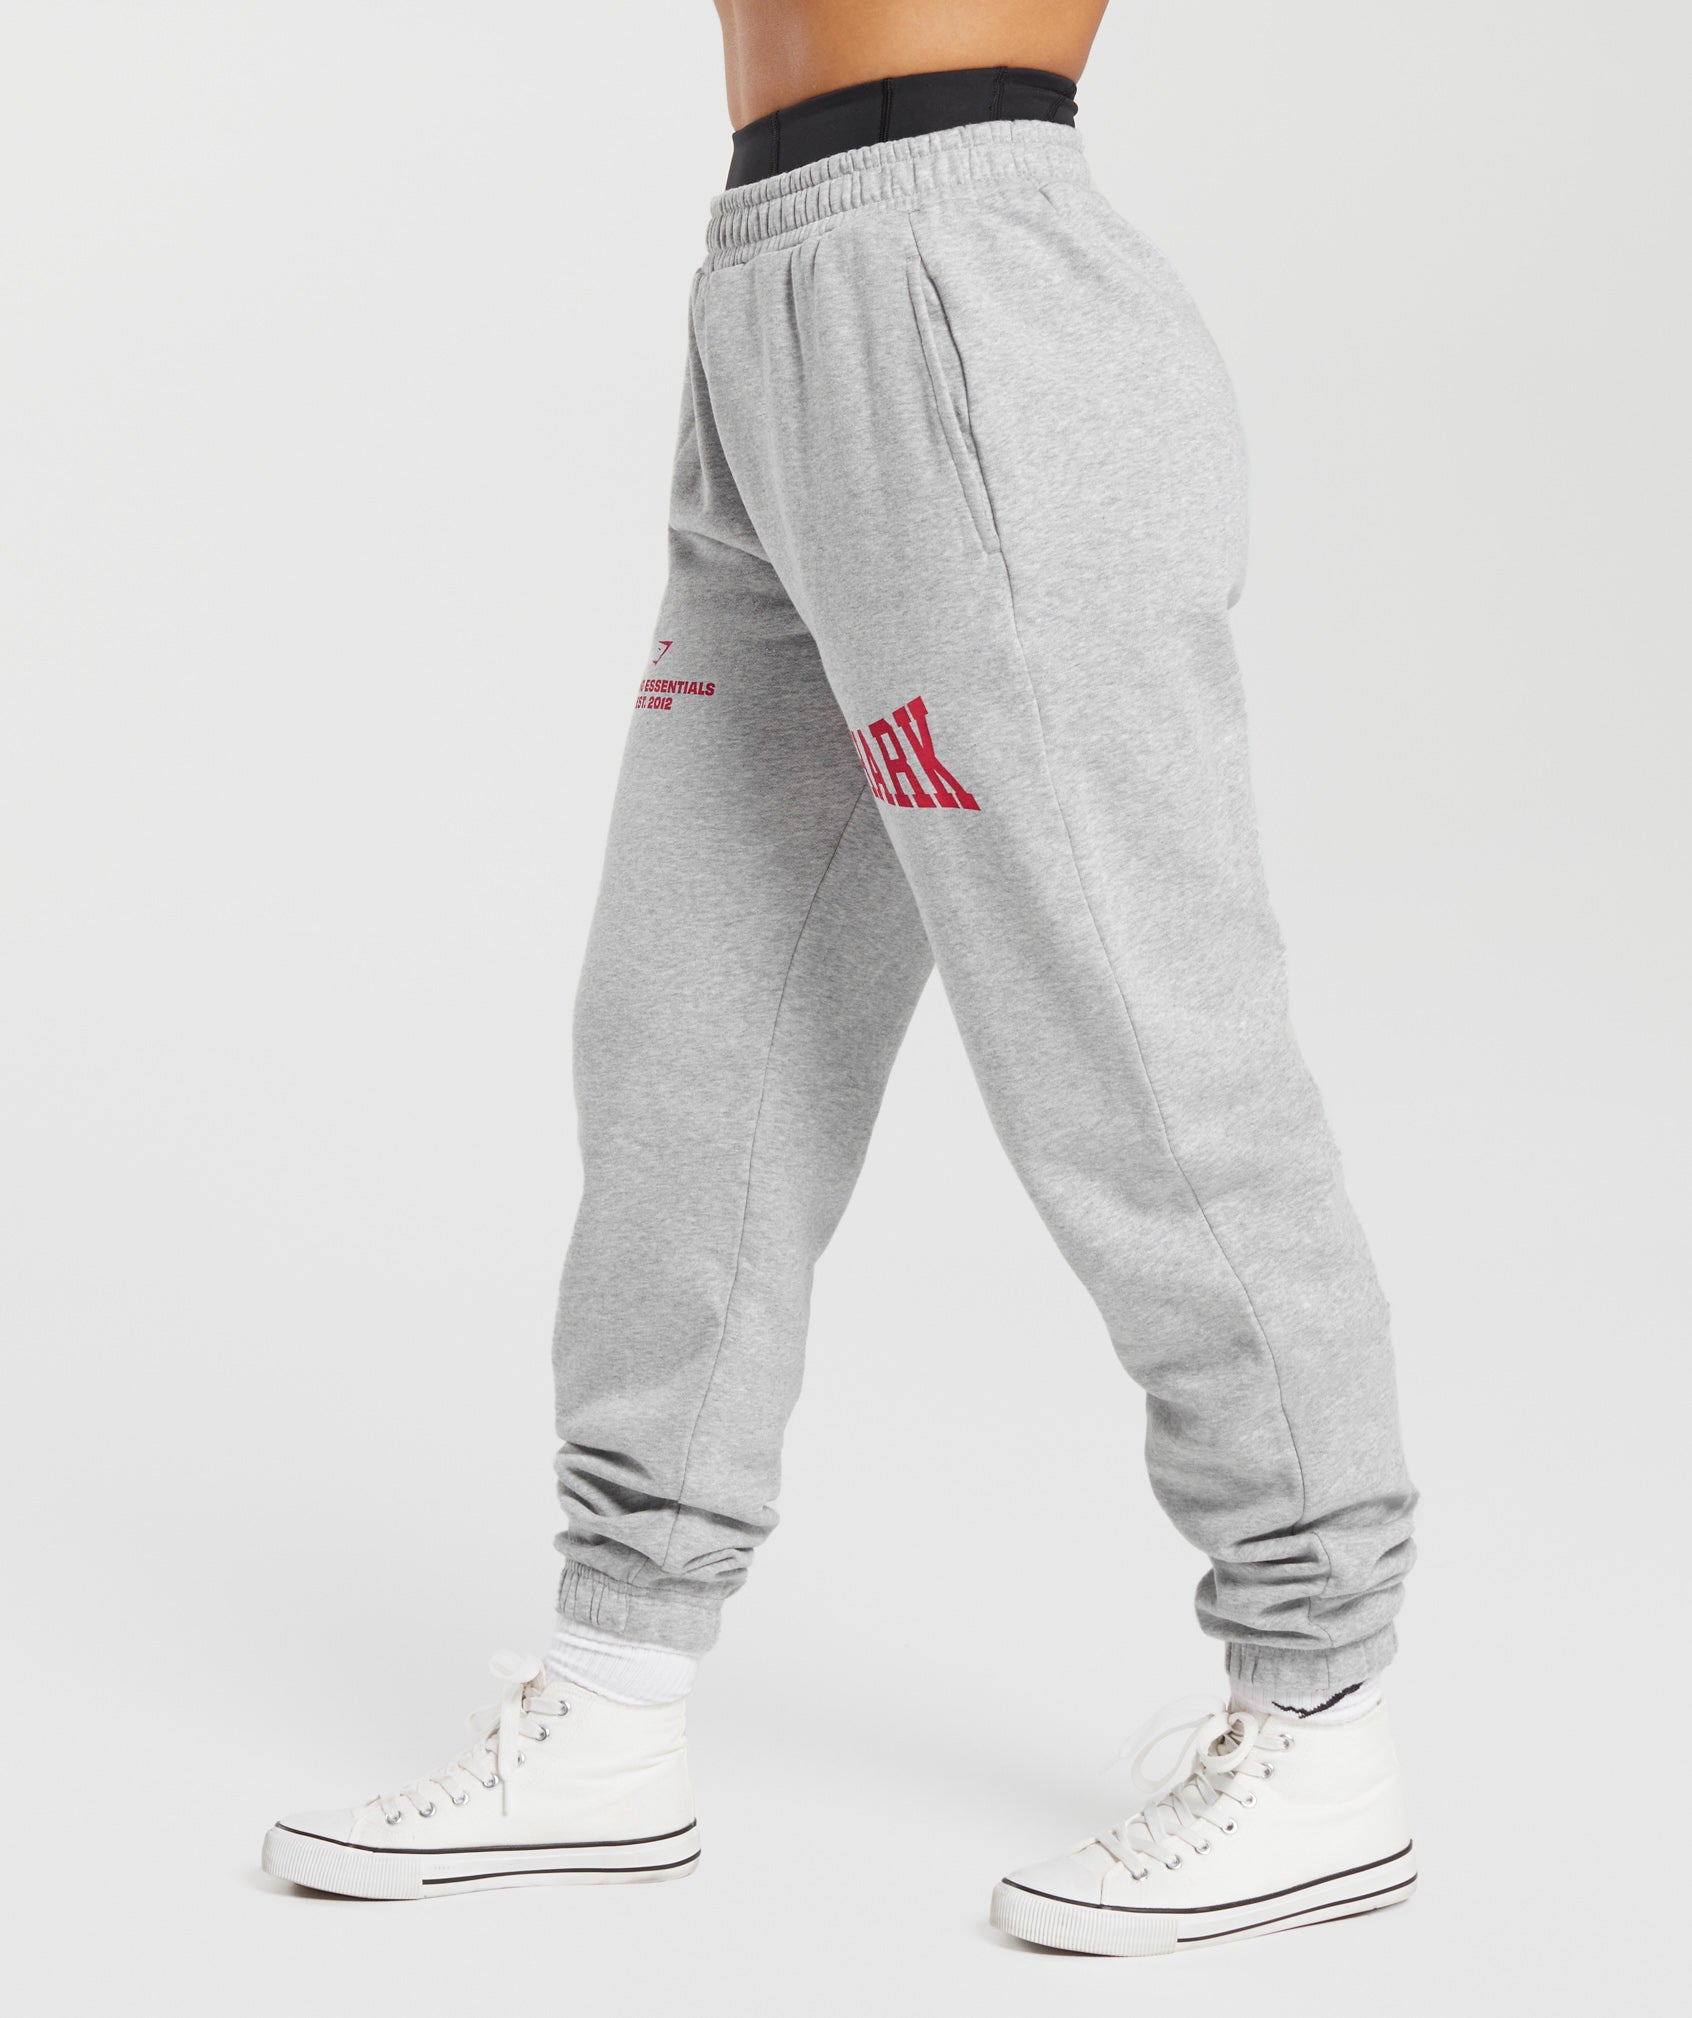 Lifting Essentials Graphic Joggers in Light Grey Core Marl - view 3